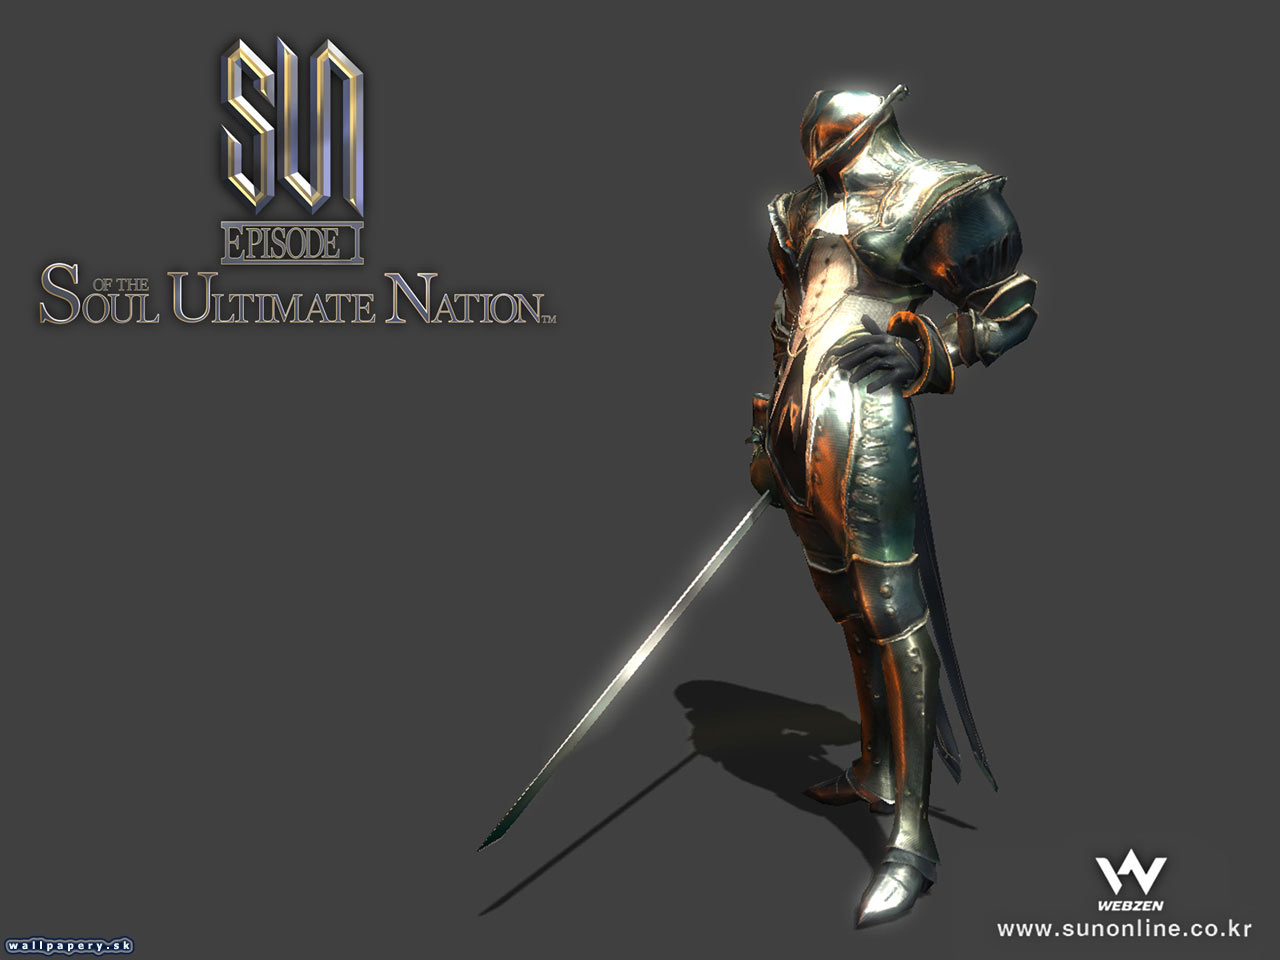 Soul Of The Ultimate Nation Wallpapers